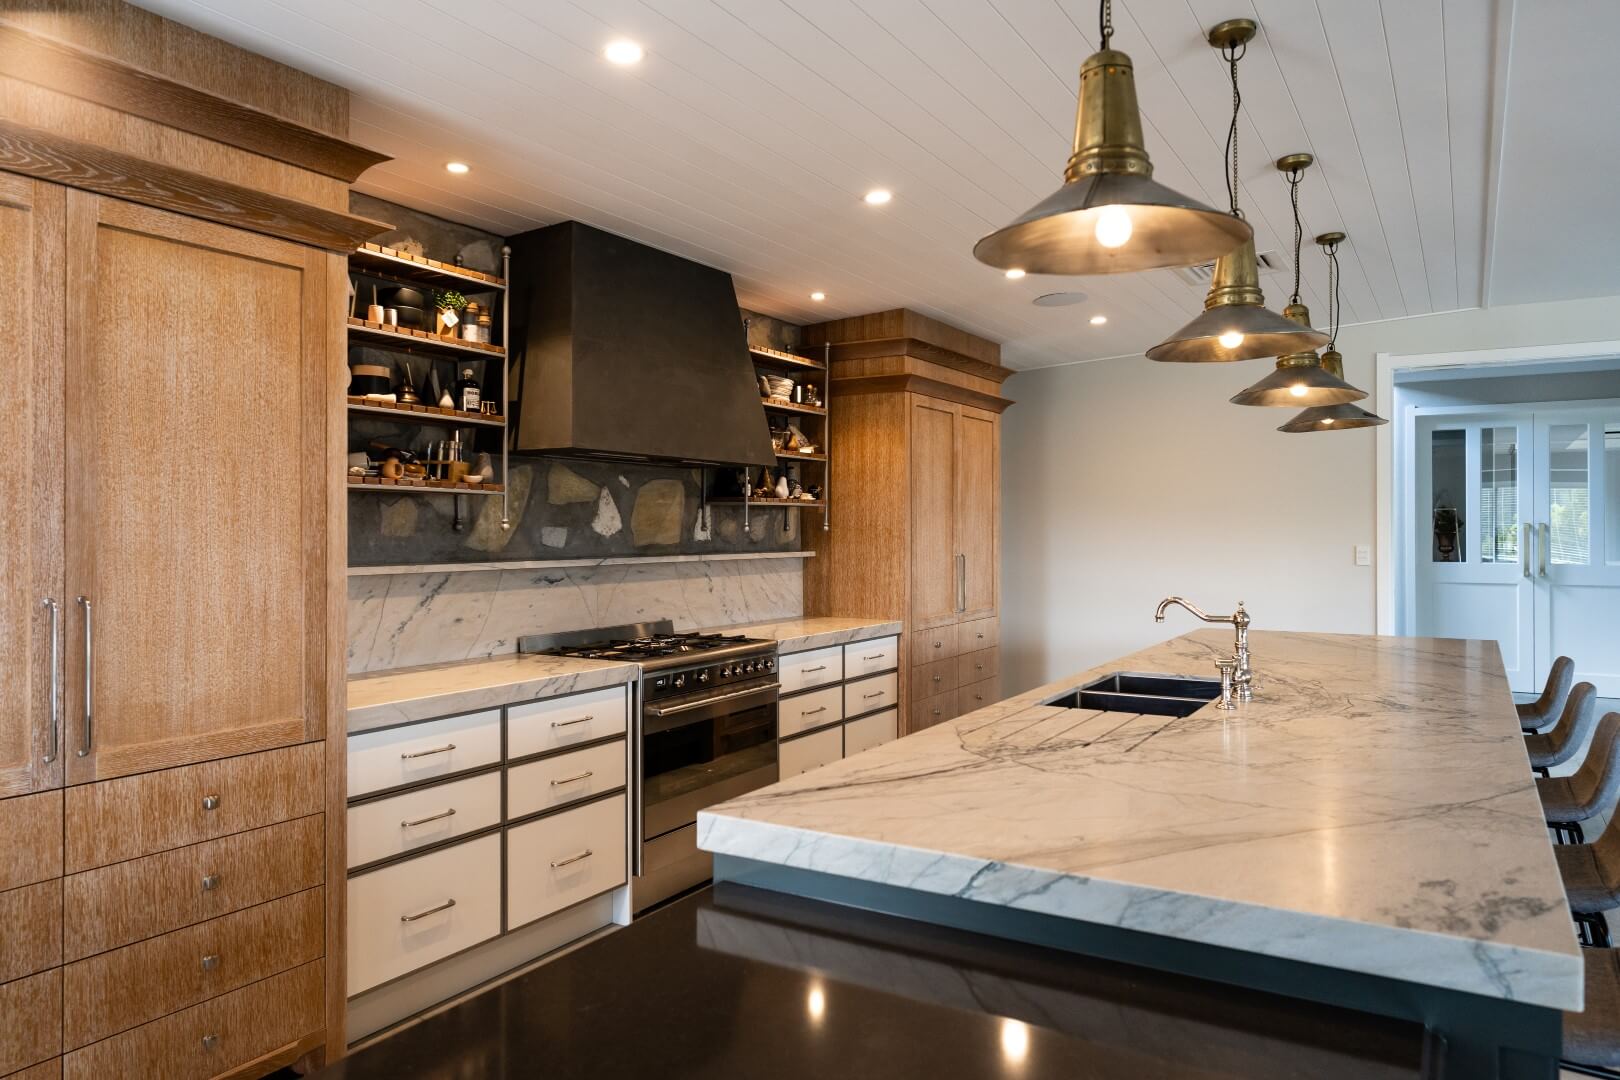 kitchen-design-whangarei-home-arcline-architecture-island-timber-feature-lighting (3)